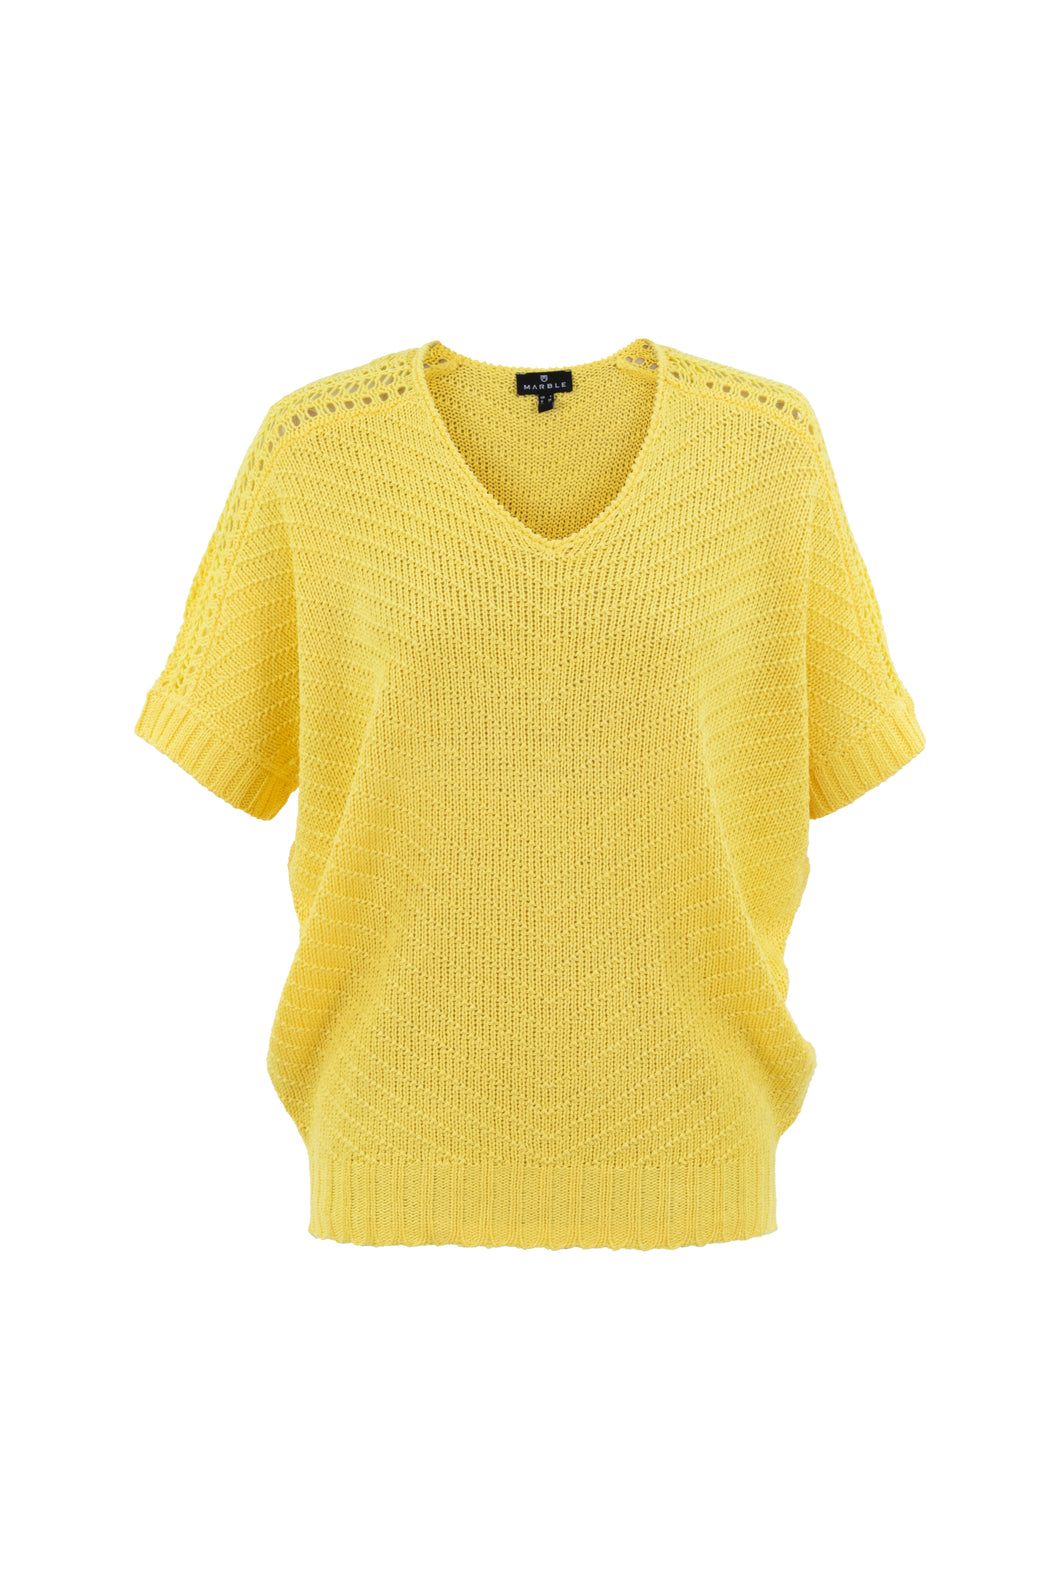 Marble Yellow V-Neck Short Dolman Sleeve Sweater with Open Knit Shoulder Detail